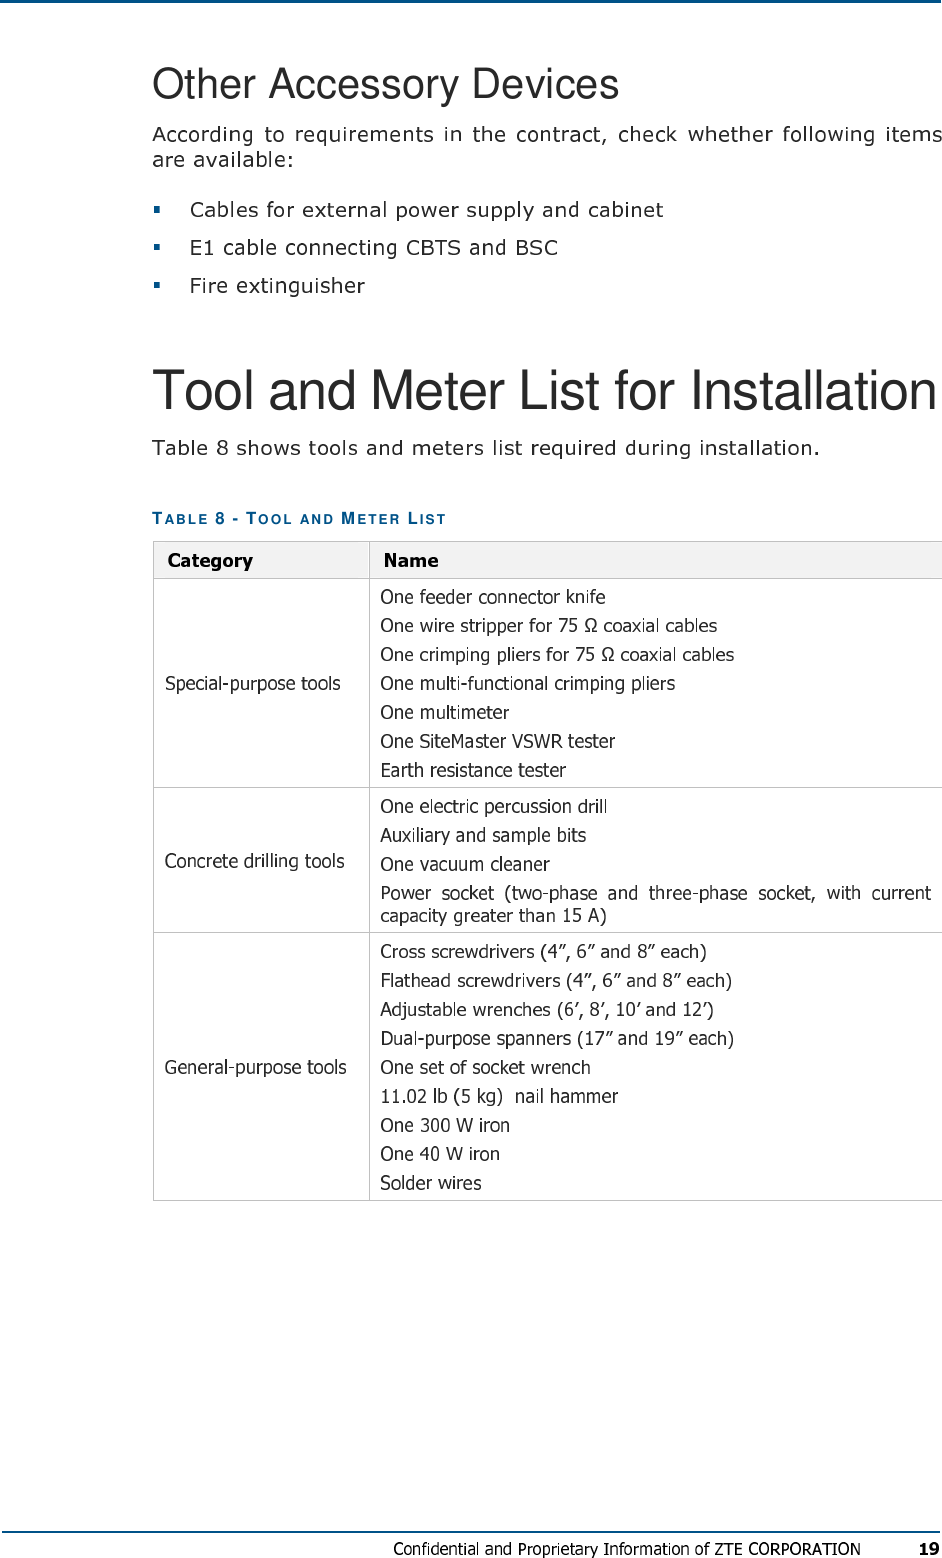 Other Accessory Devices    Tool and Meter List for Installation TABL E  8 - TO O L   AN D   MET E R   LI S T 